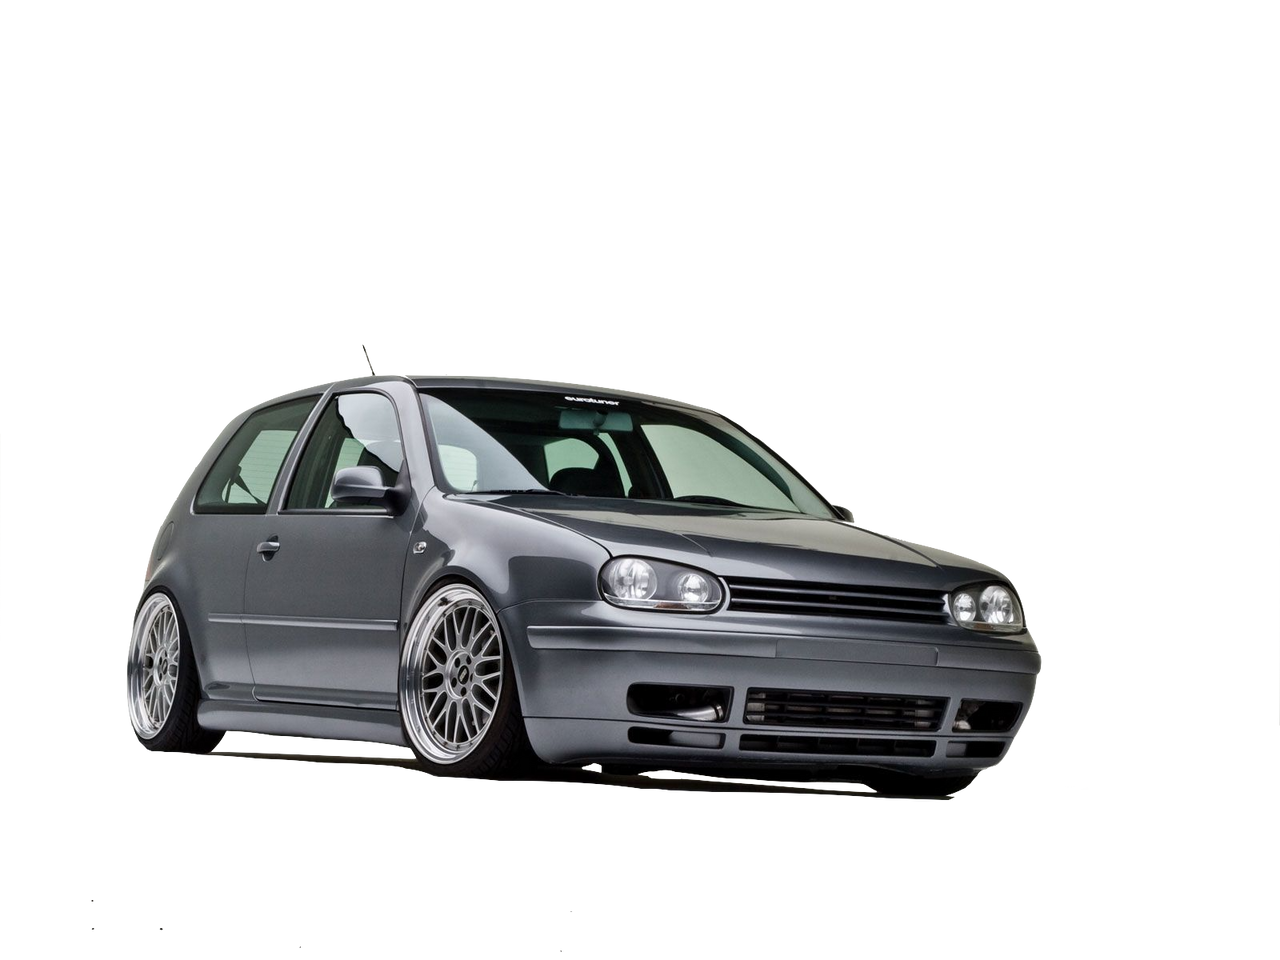 VW Bora with a 960 hp Turbo VR6